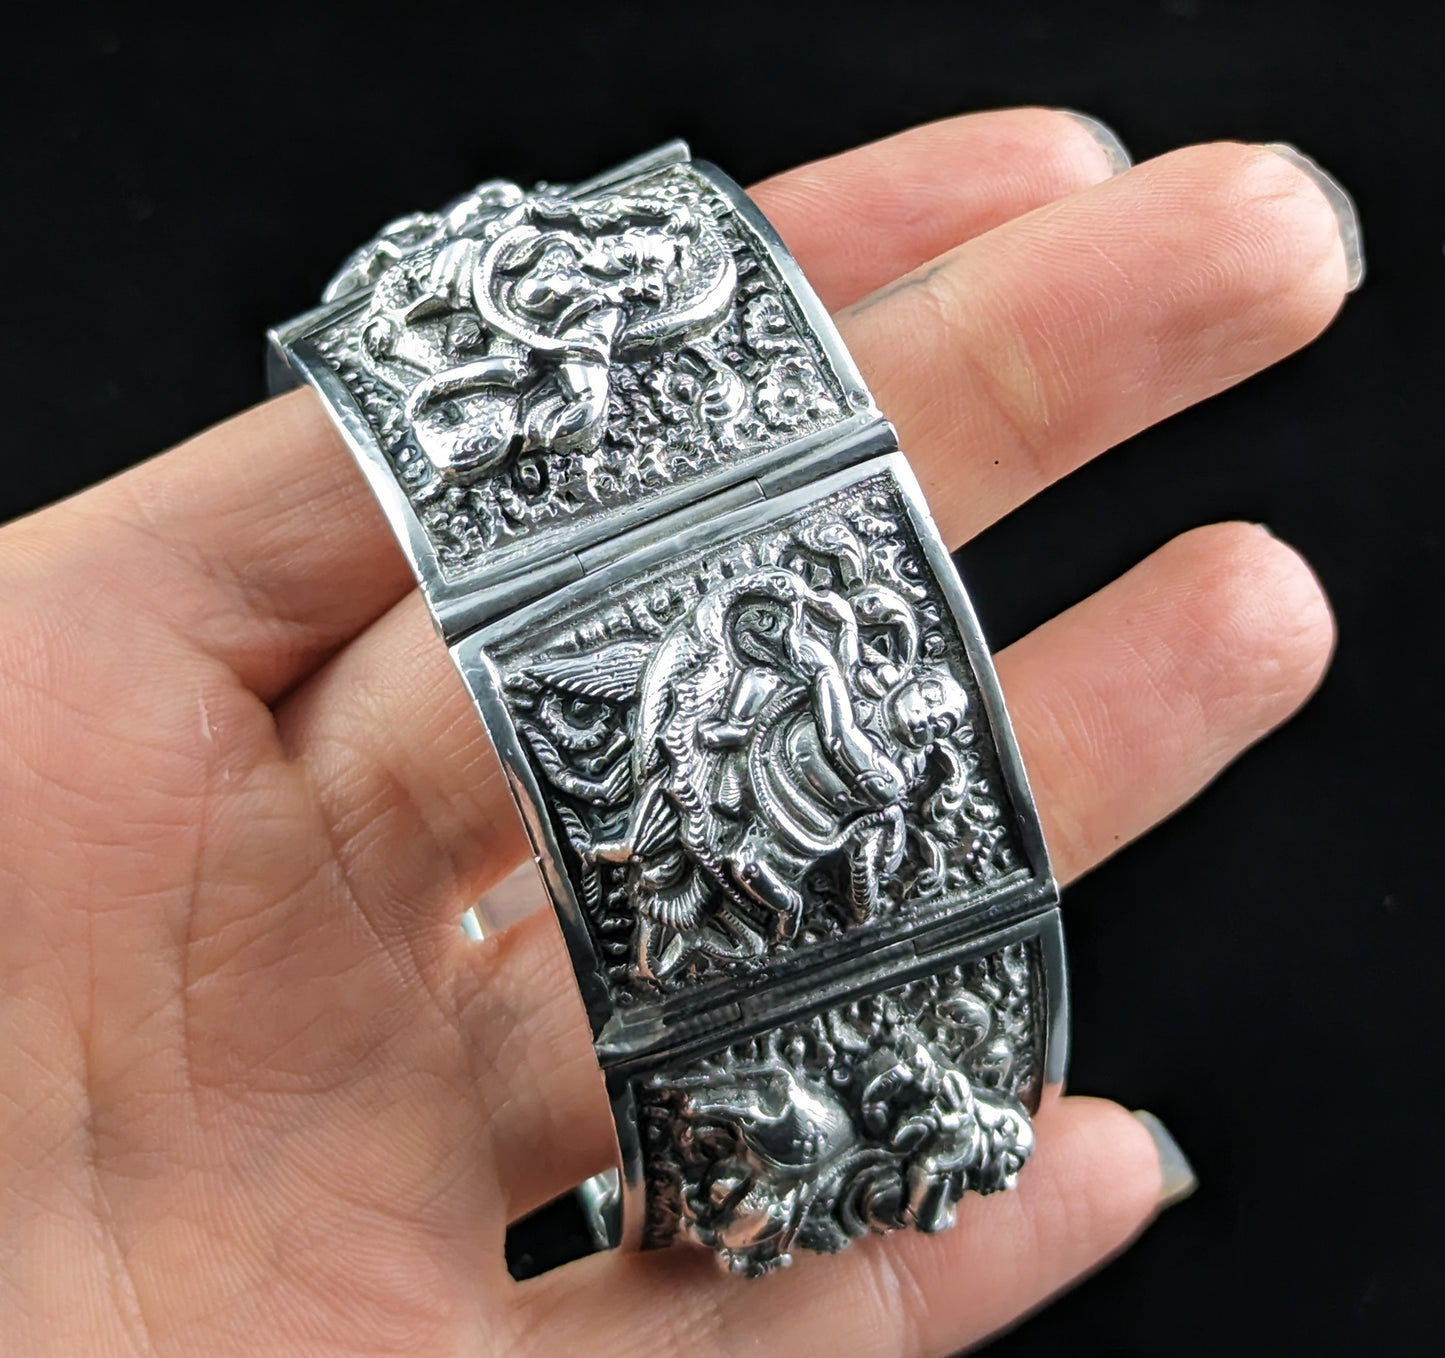 Antique Anglo-Indian sterling silver bracelet, Buddhist deities, Victorian